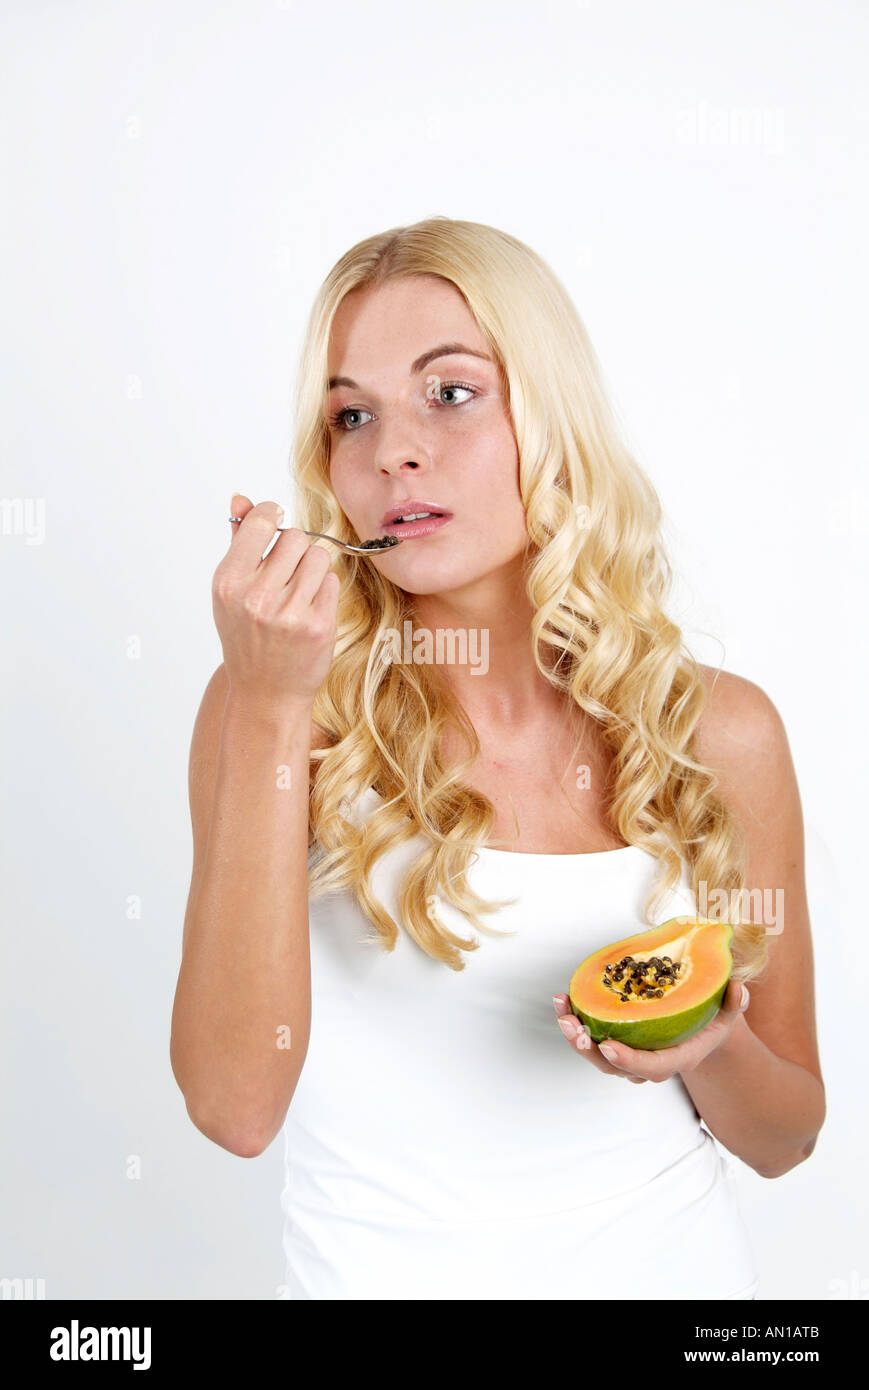 Lifestyle young 20+ woman enjoying a papaw Wellfood health living Stock Photo